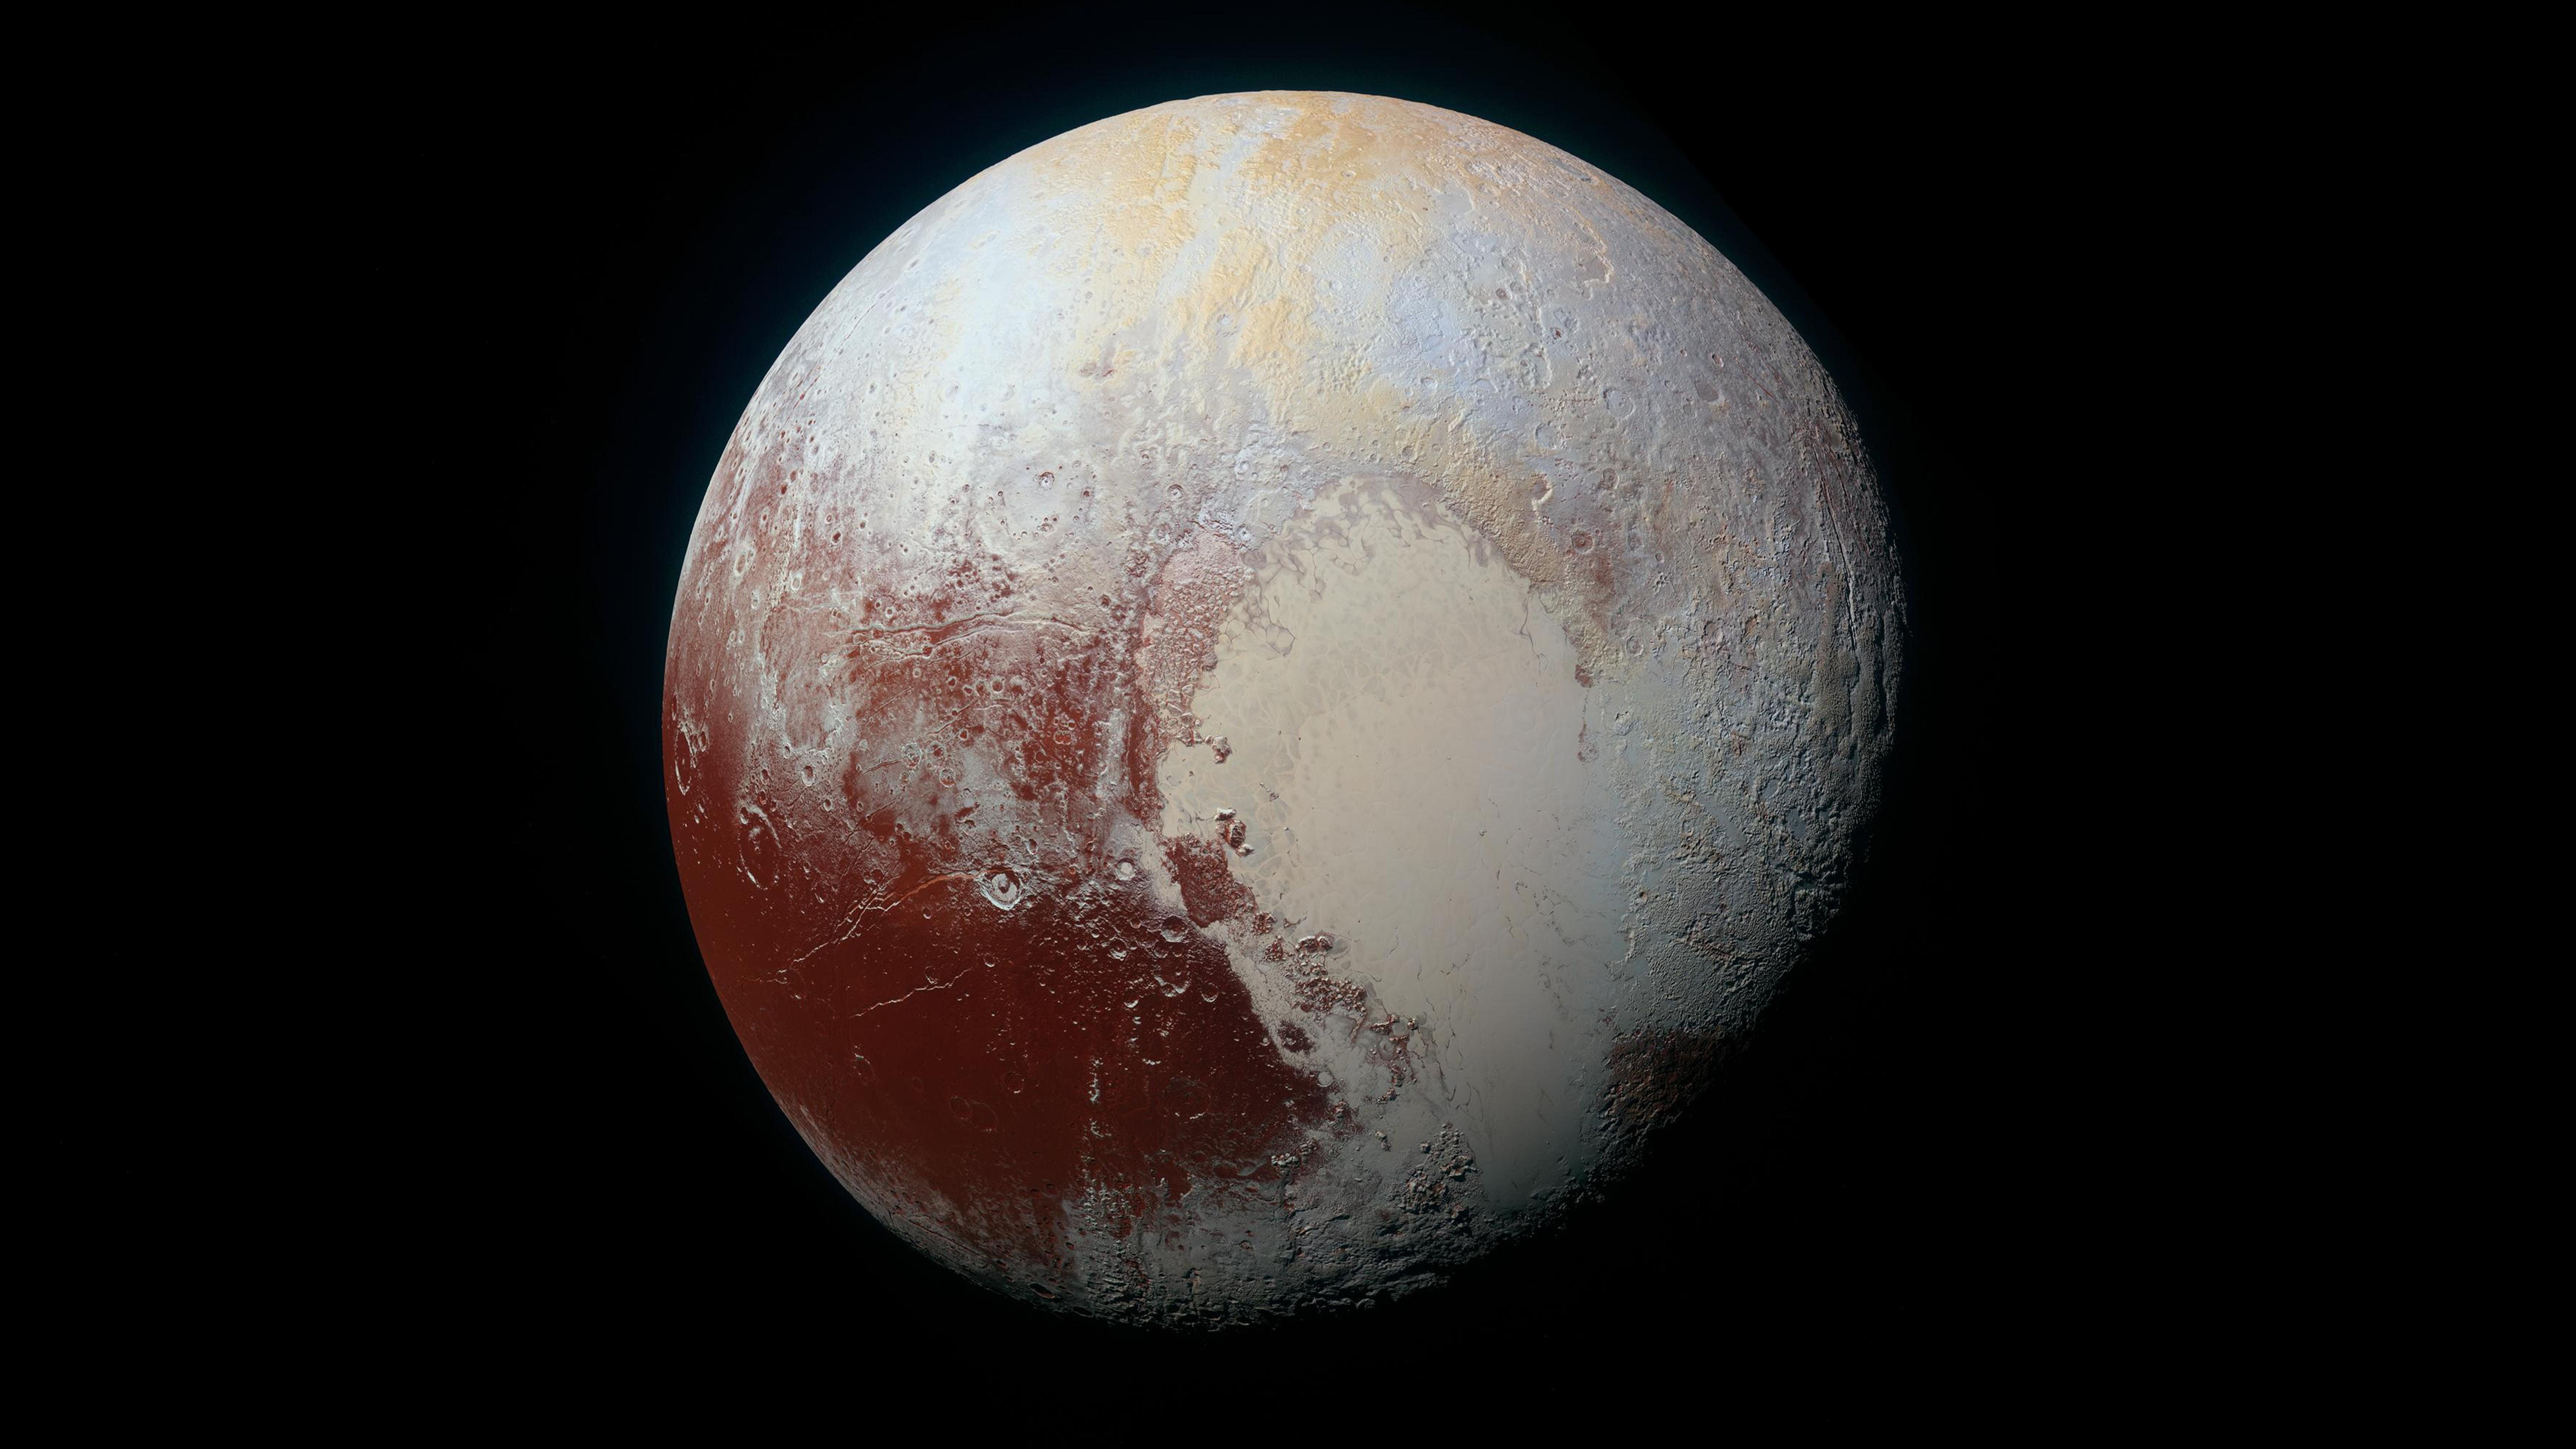 Pluto 4K wallpaper for your desktop or mobile screen free and easy to download